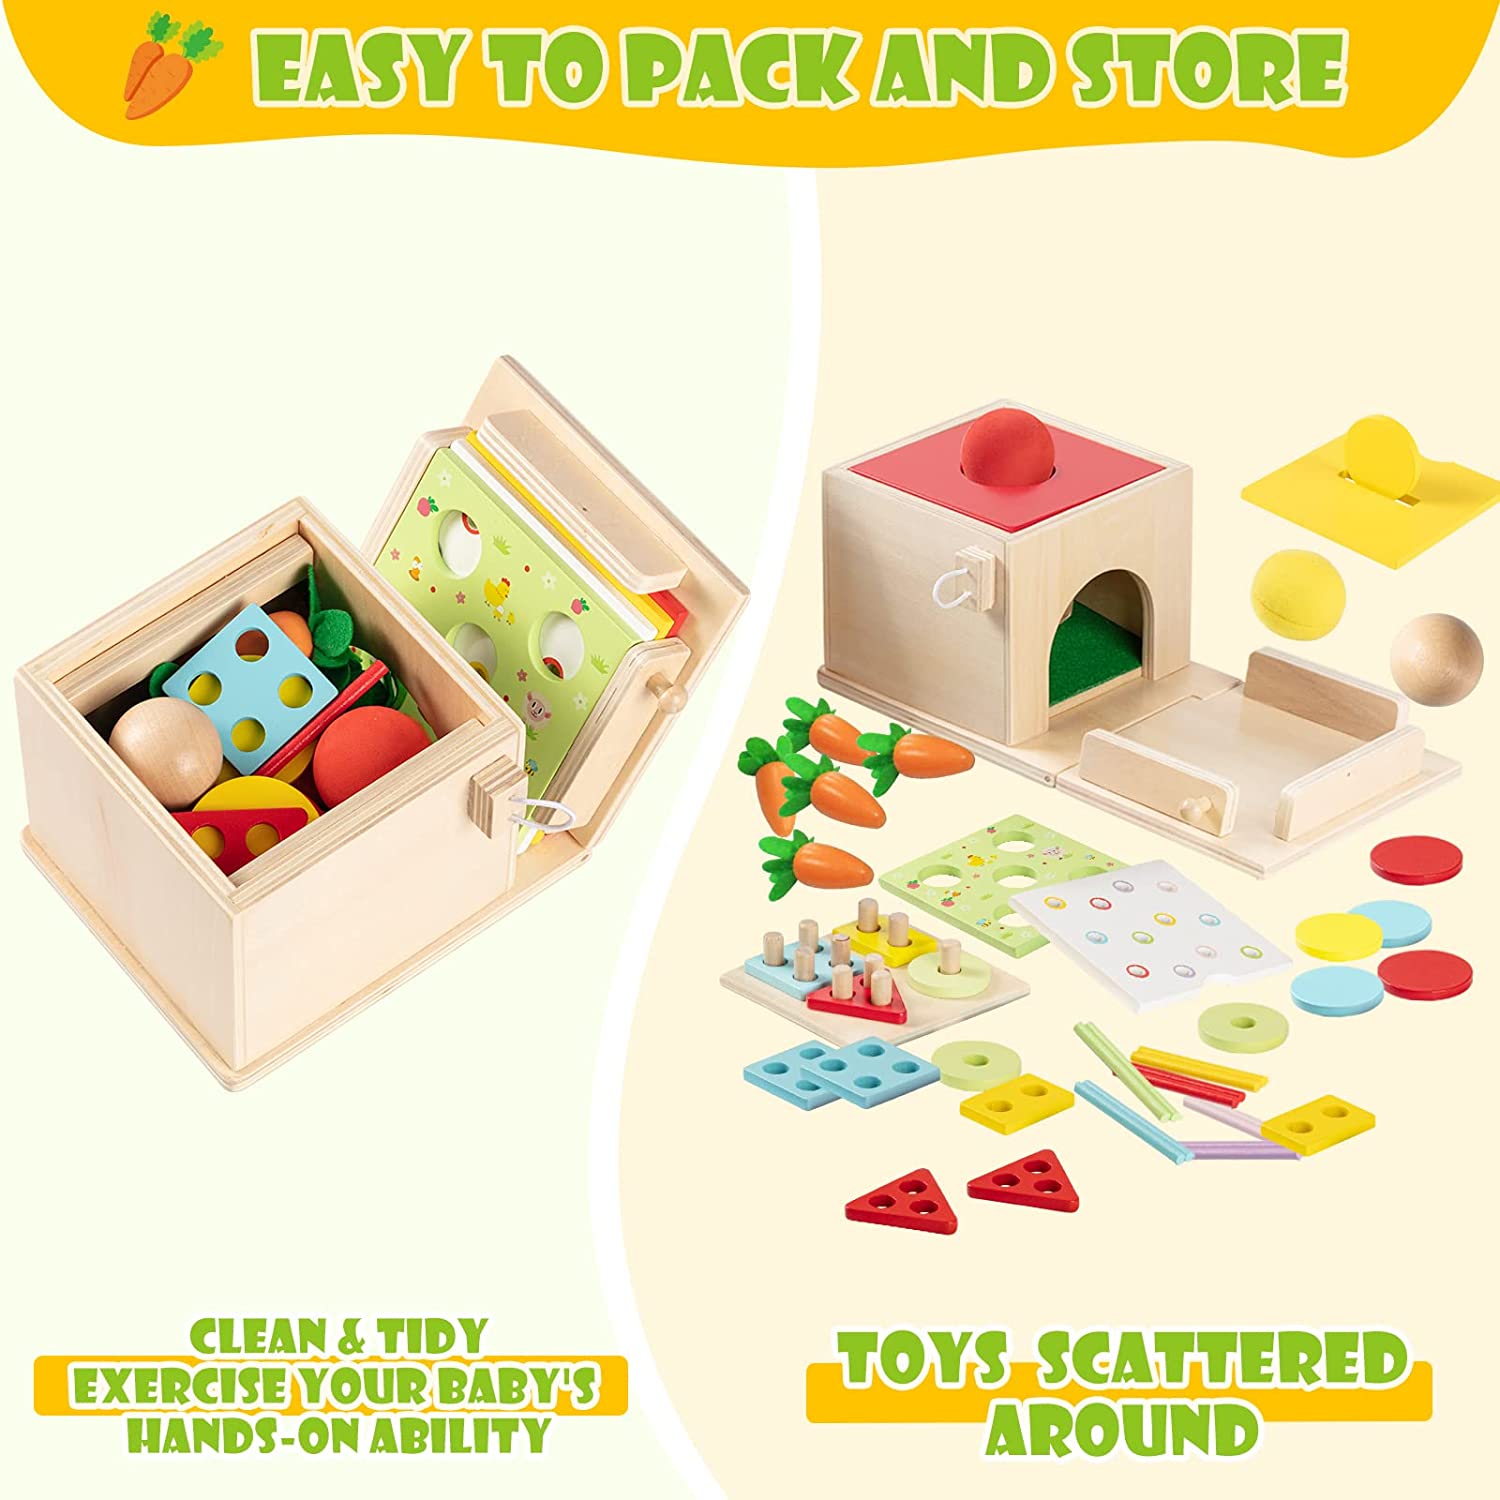 Play Kitchen Accessories, Frogprin Wooden Toy Mixer Set, Pretend Play Food  Sets for Kids Kitchen - Includes Extra Egg, Rolling Pin, Cookies, Sugar